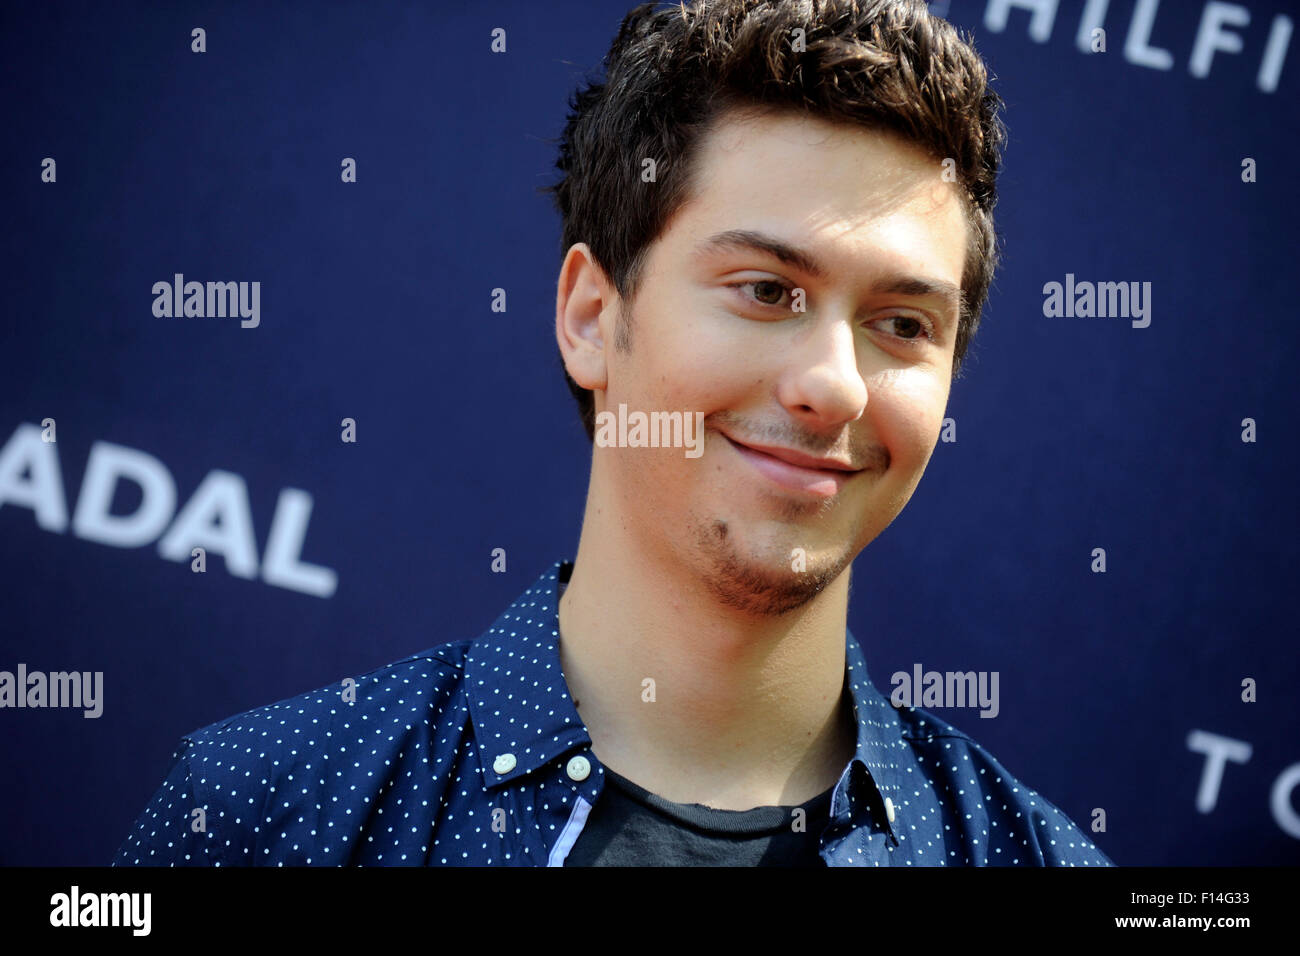 Nat wolff hi-res stock photography and images - Alamy